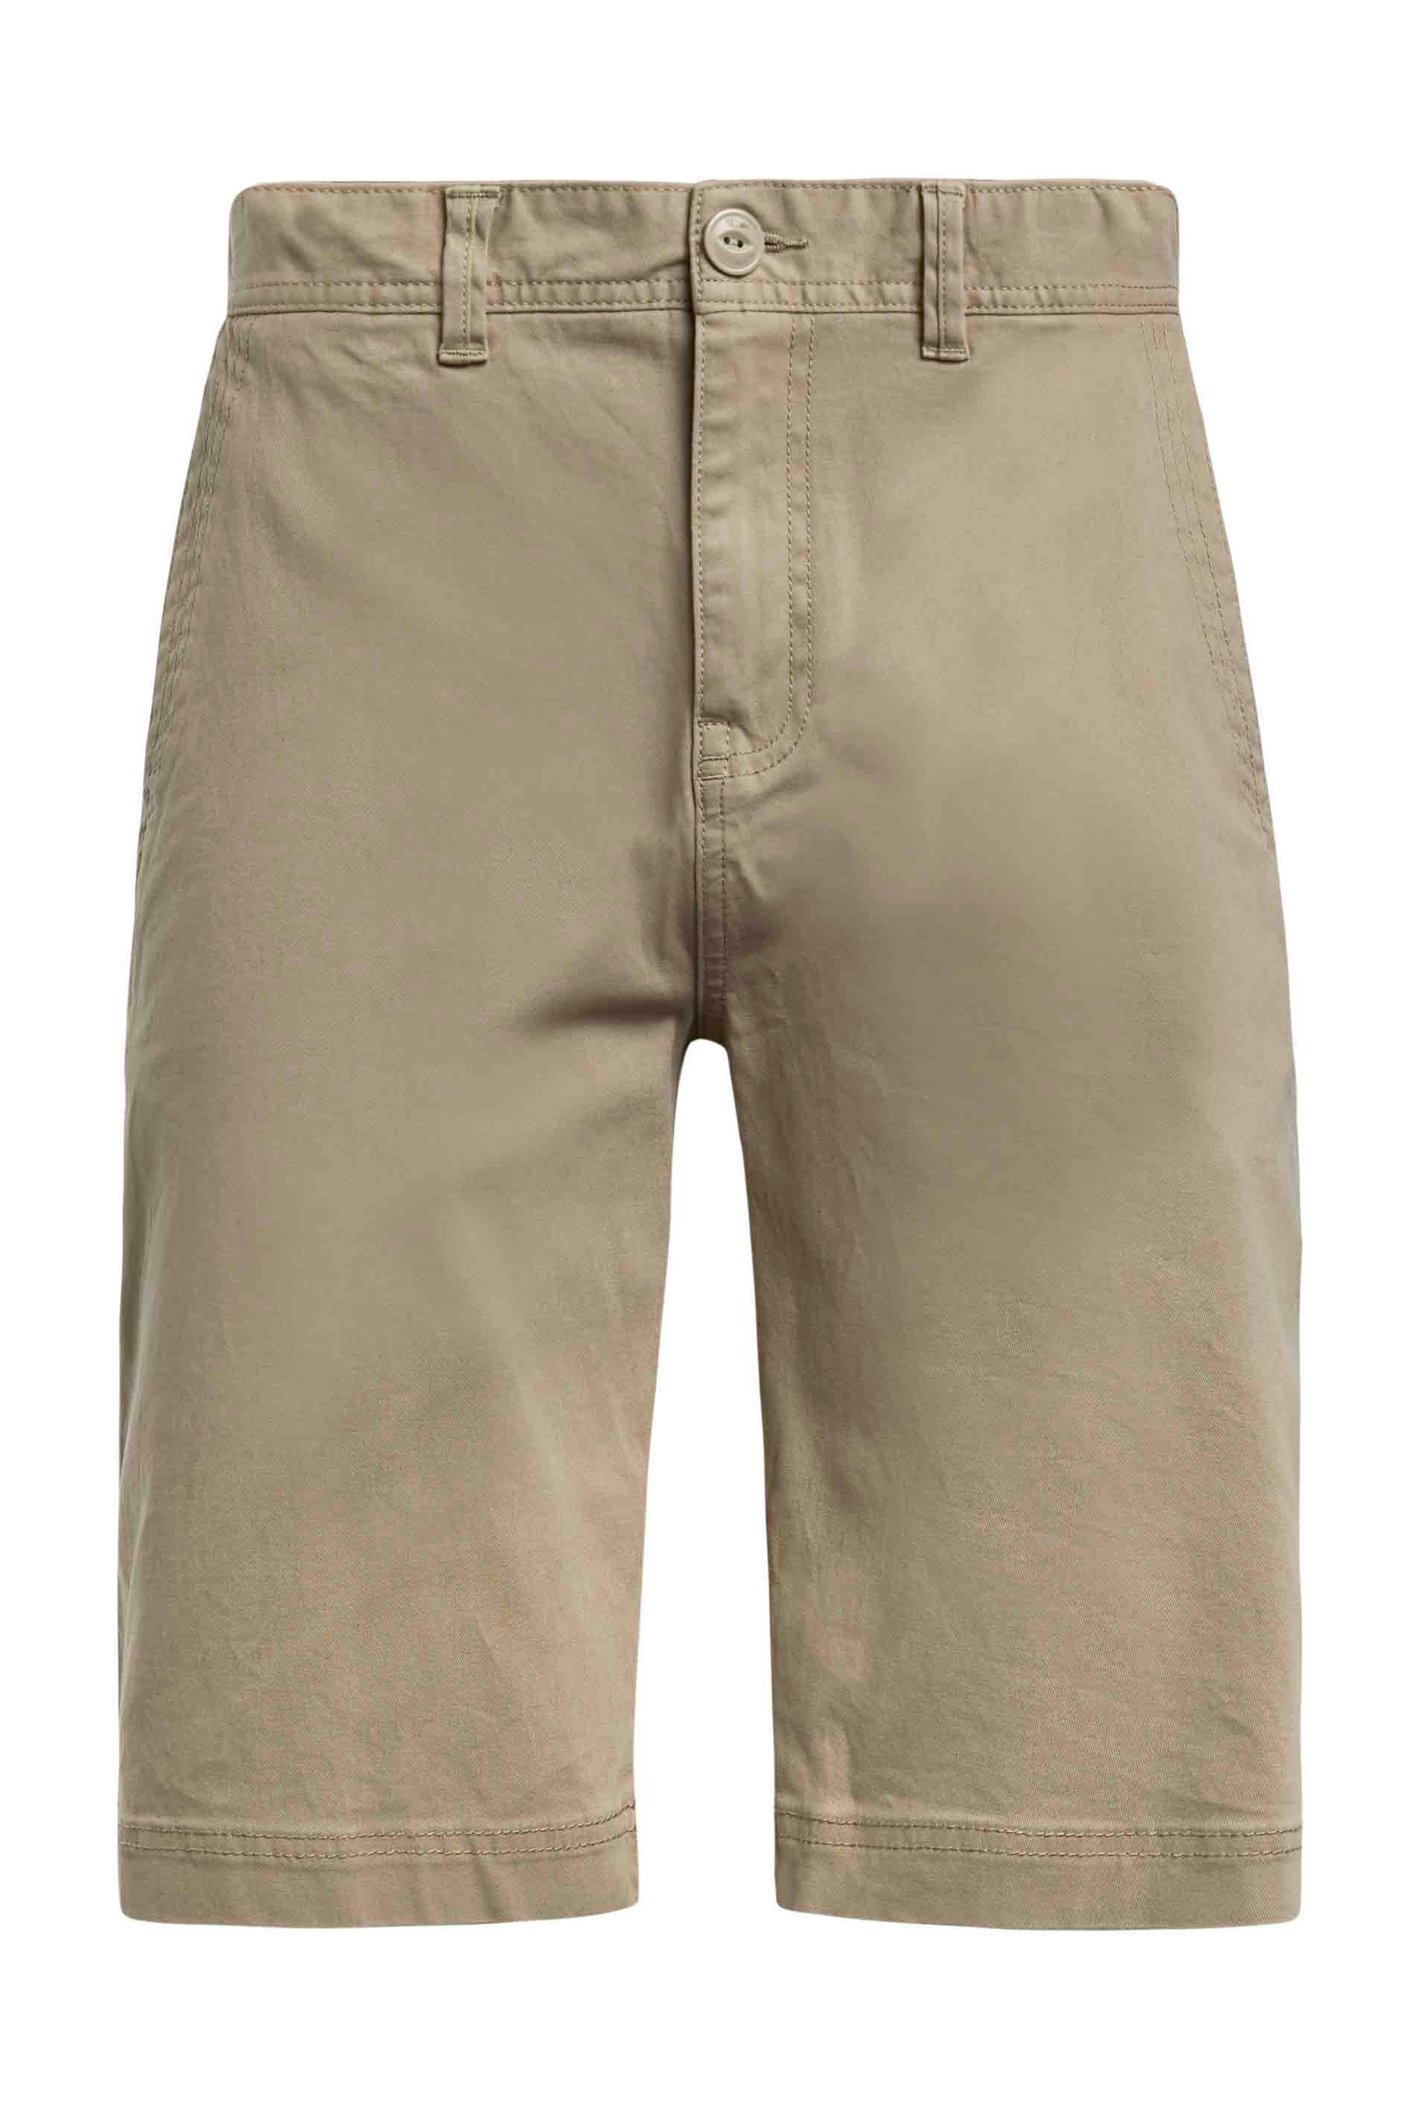 Weird Fish Rayburn Flat Front Shorts Taupe Grey Size 40